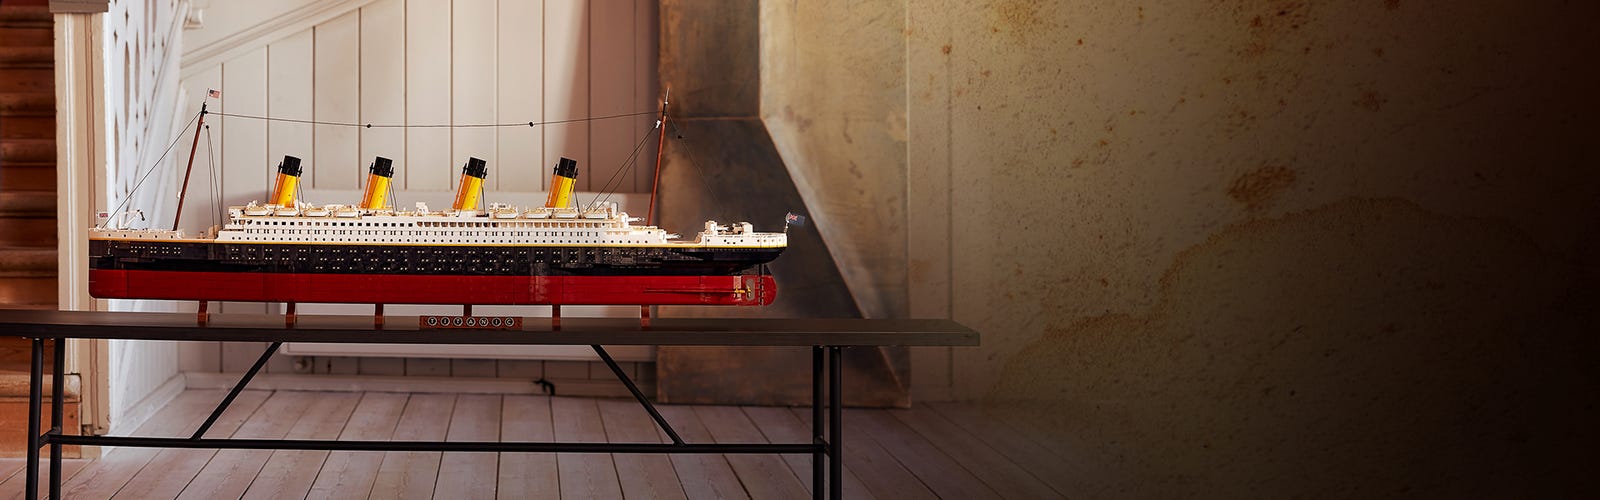 Brickfinder - LEGO Titanic 10294 Officially Announced!